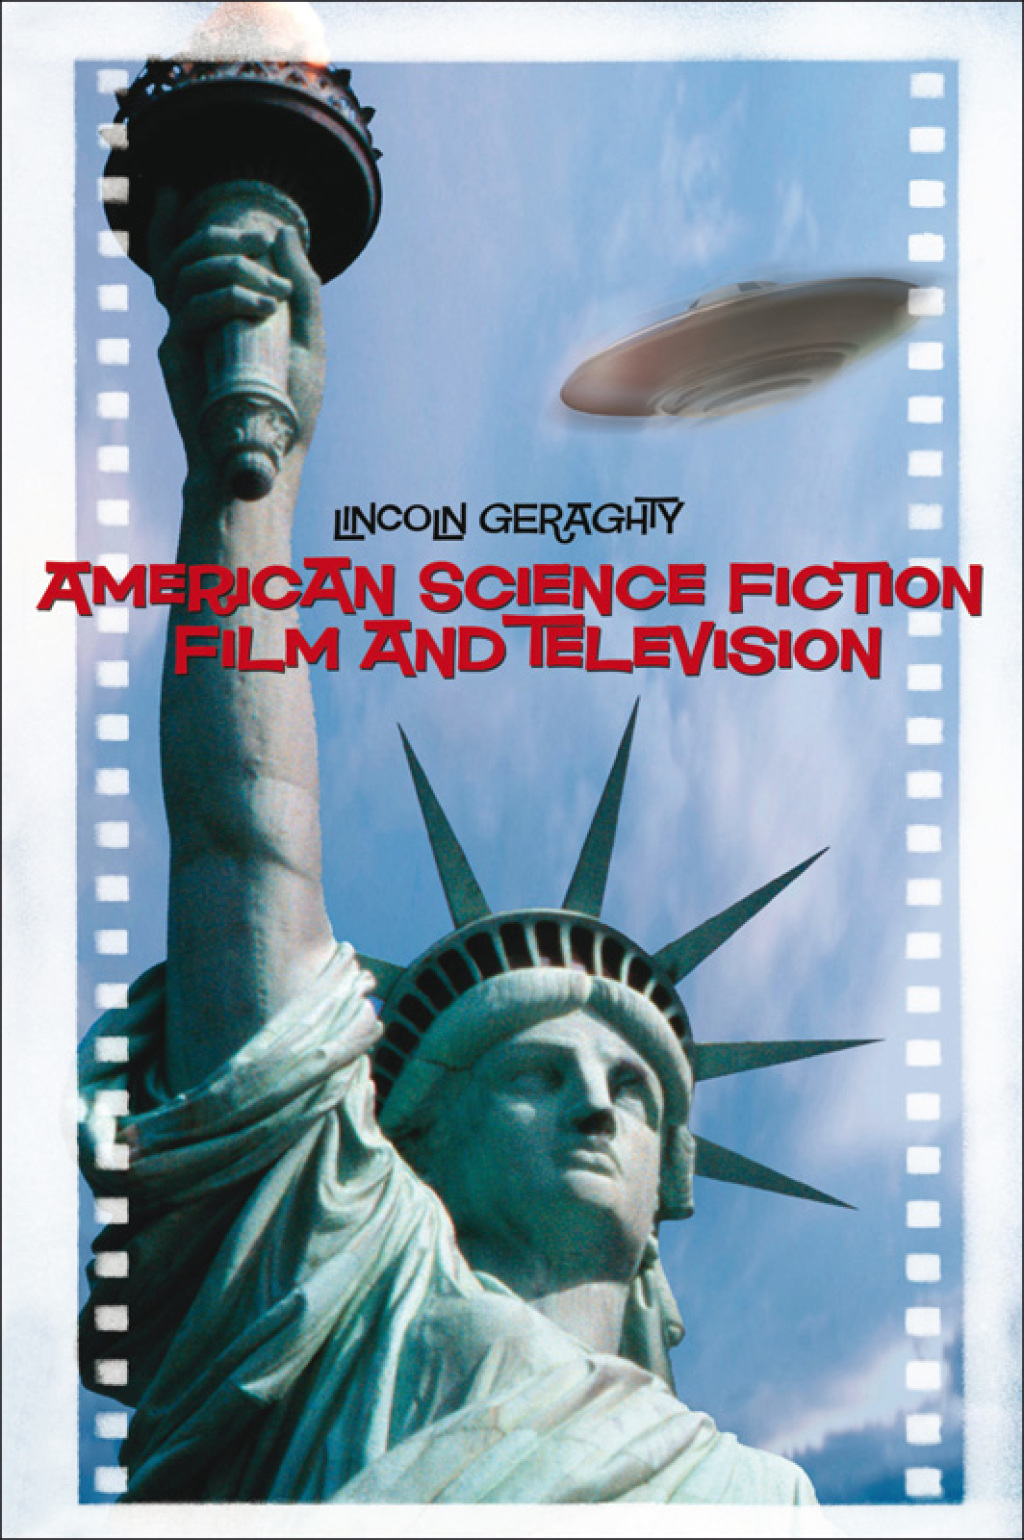 American Science Fiction Film and Television (eBook) - Lincoln Geraghty